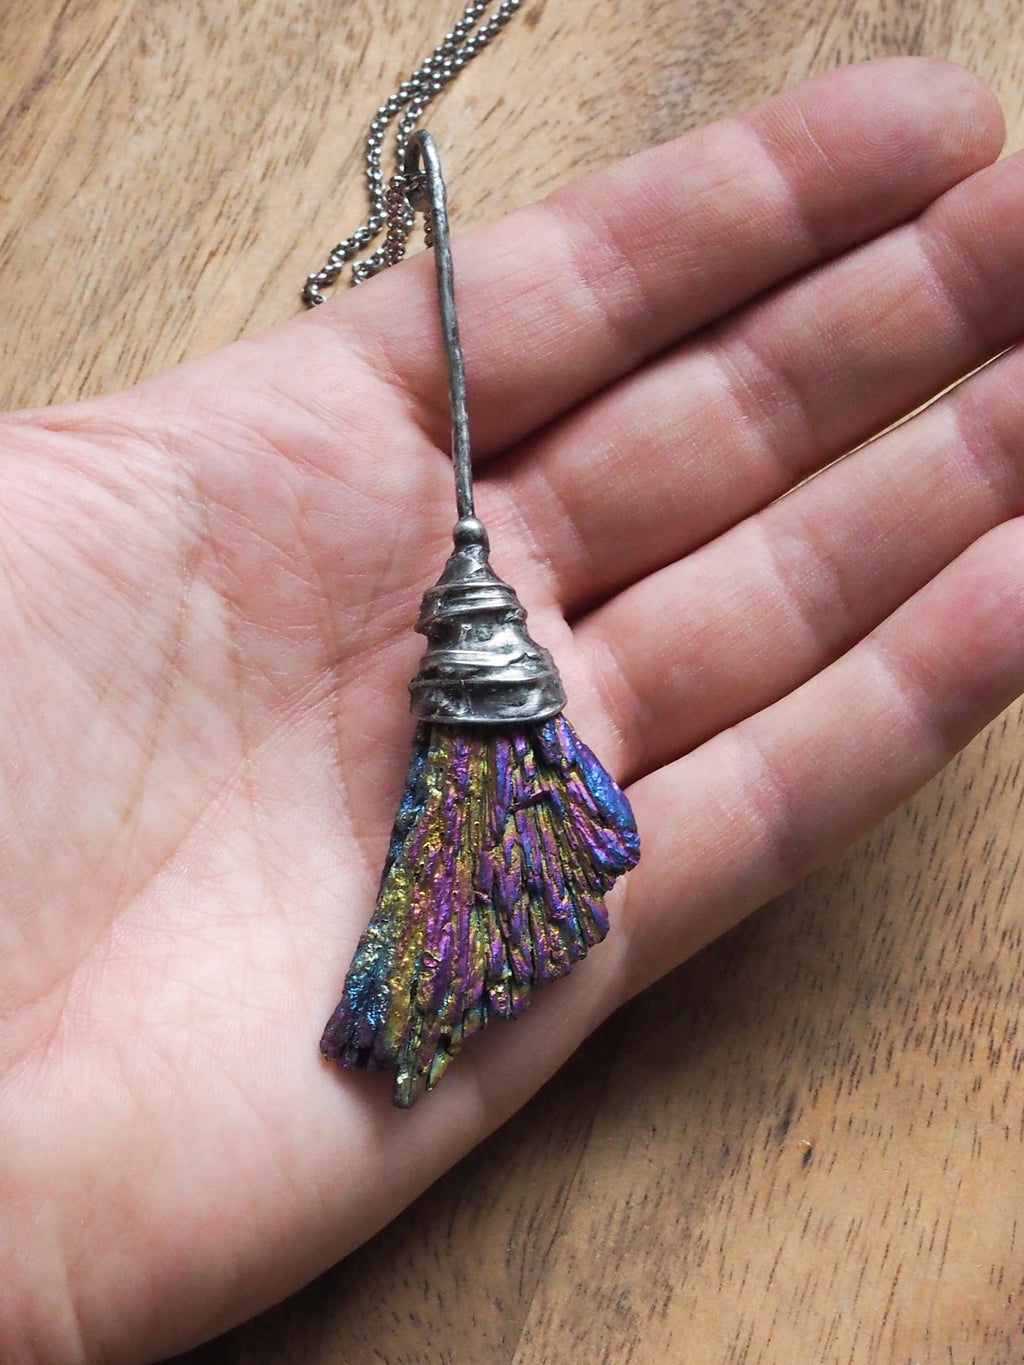 hand holding rainbow besom witches broom healing crystal talisman necklace